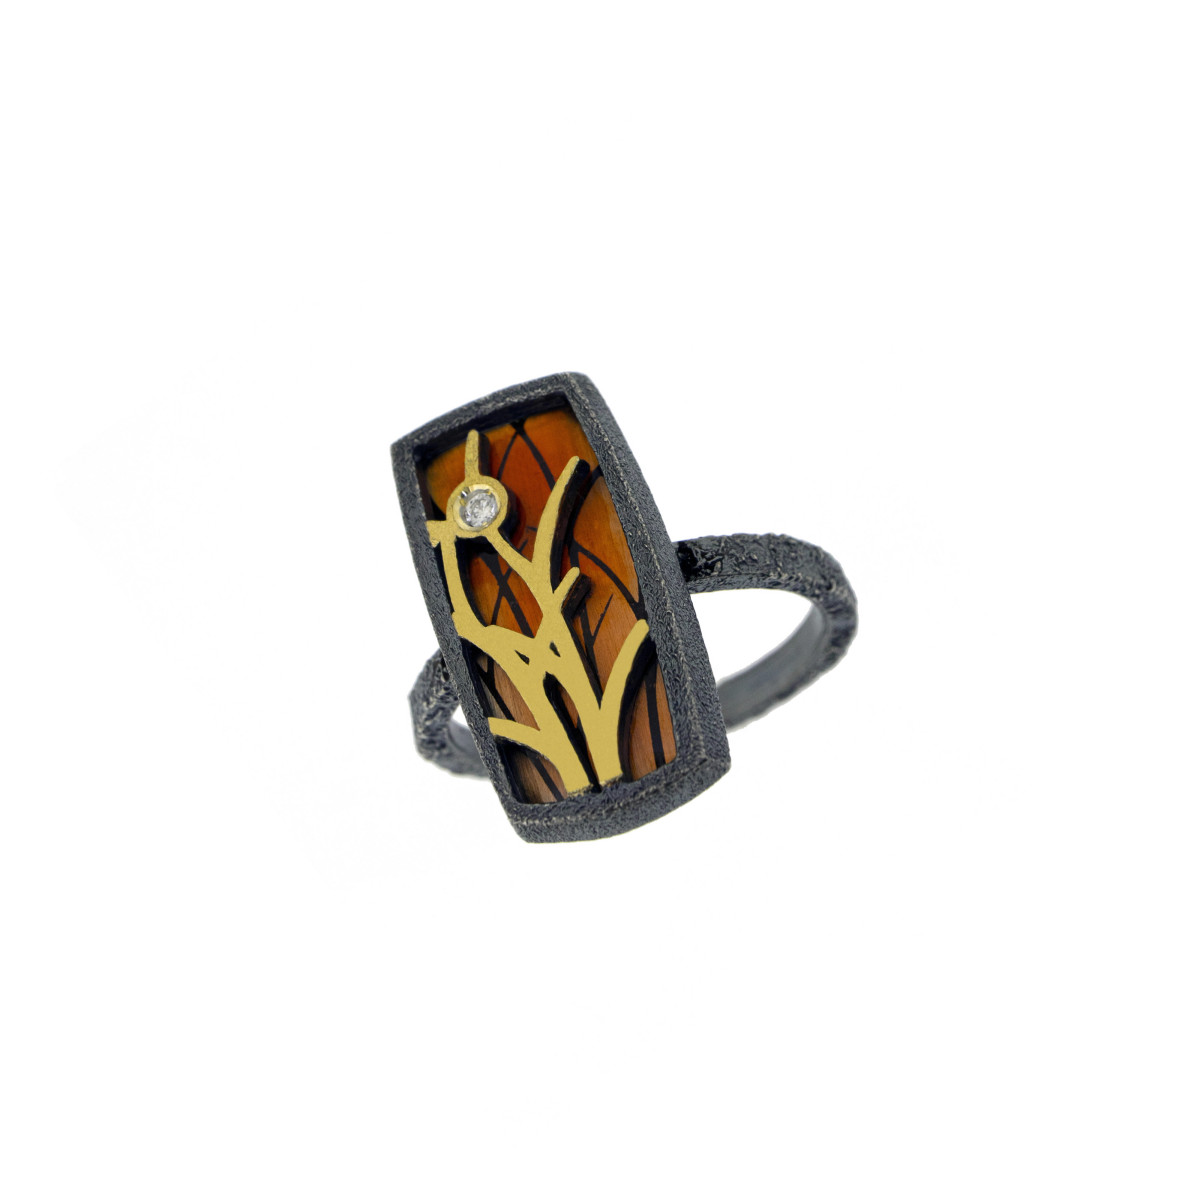 Ring made of silver, 18k gold, enamel and brilliant